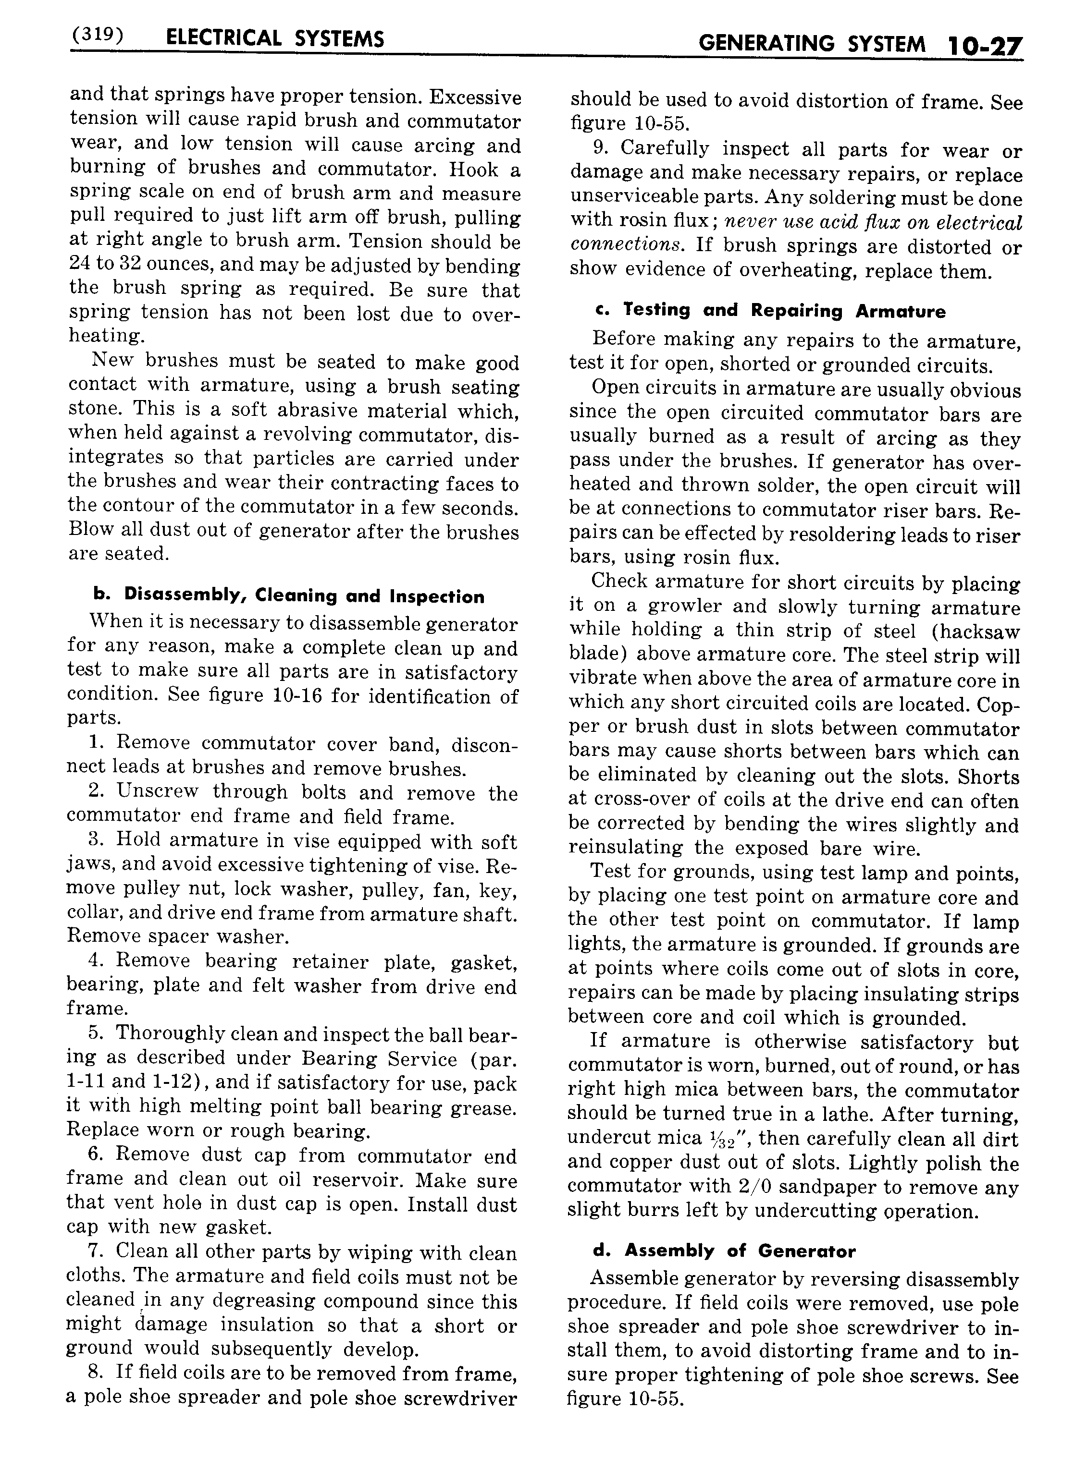 n_11 1951 Buick Shop Manual - Electrical Systems-027-027.jpg